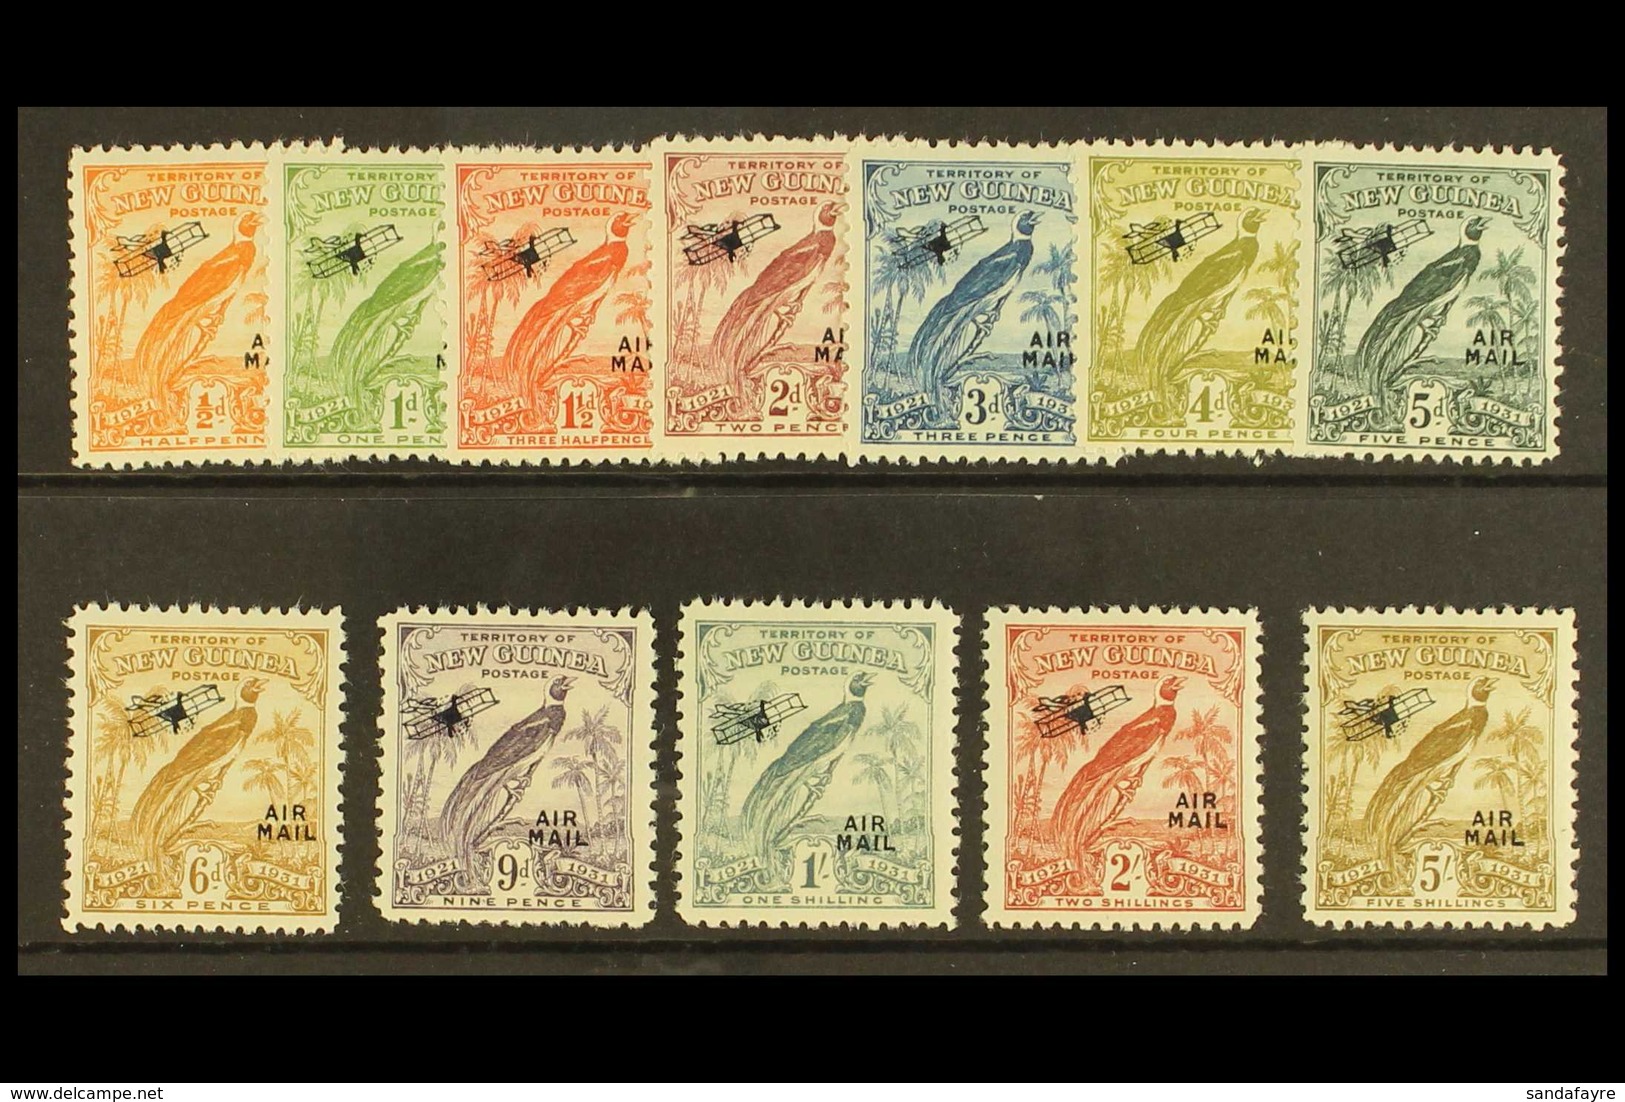 1931 10th Anniv Air Mail Opts (with Dates) Set Complete To 5s, SG 163/174, Very Fine Mint. (12 Stamps) For More Images,  - Papua Nuova Guinea